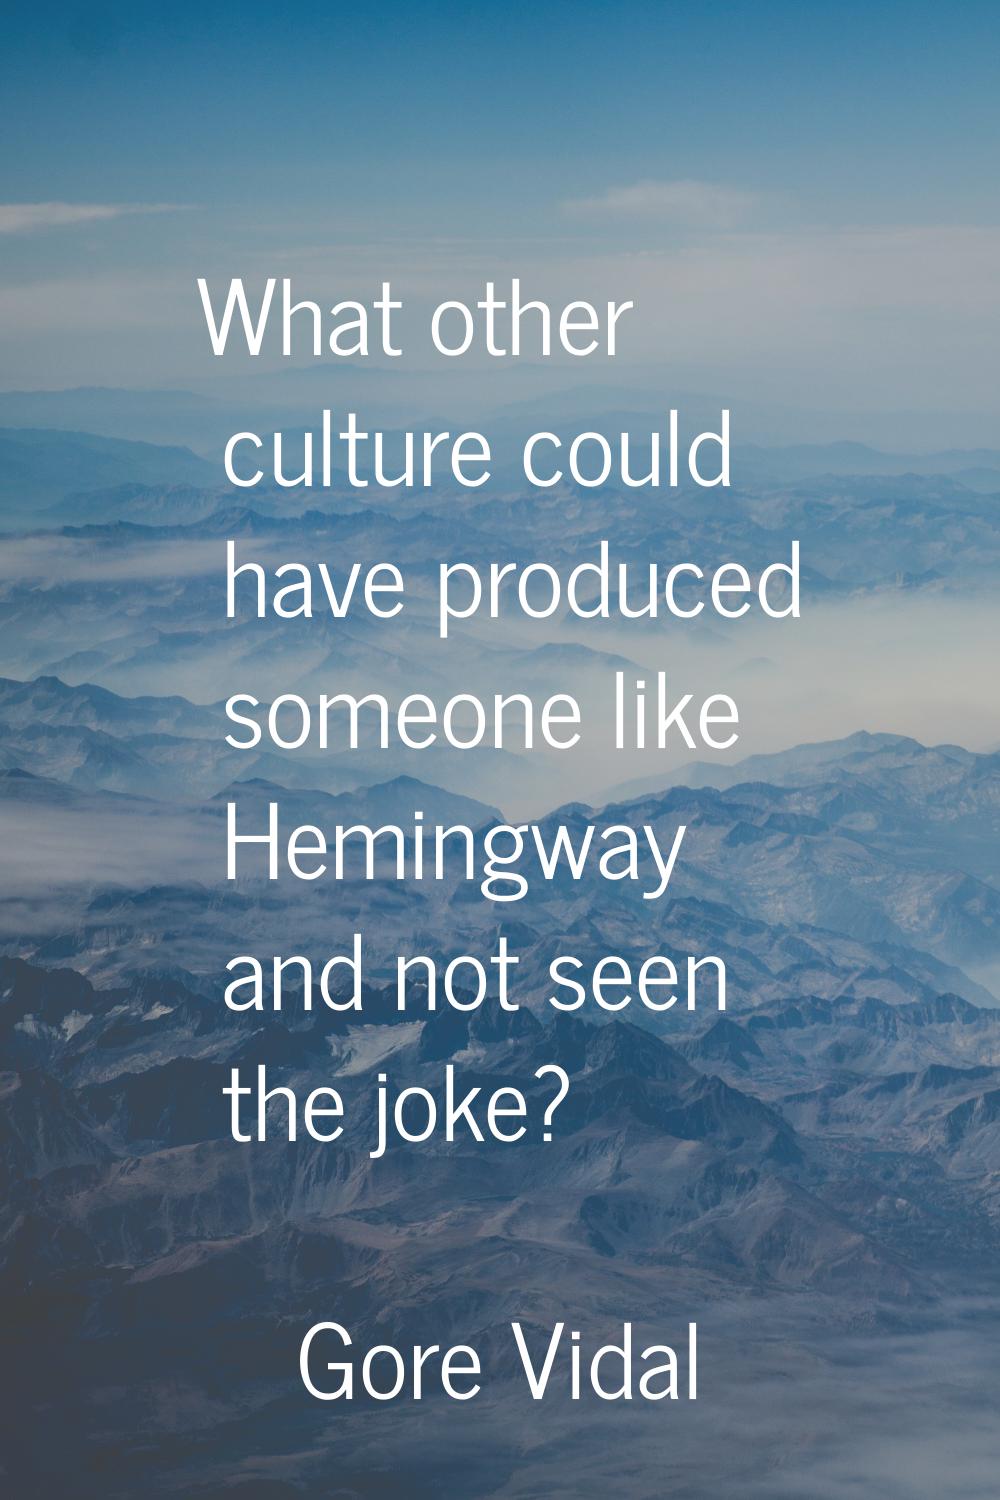 What other culture could have produced someone like Hemingway and not seen the joke?